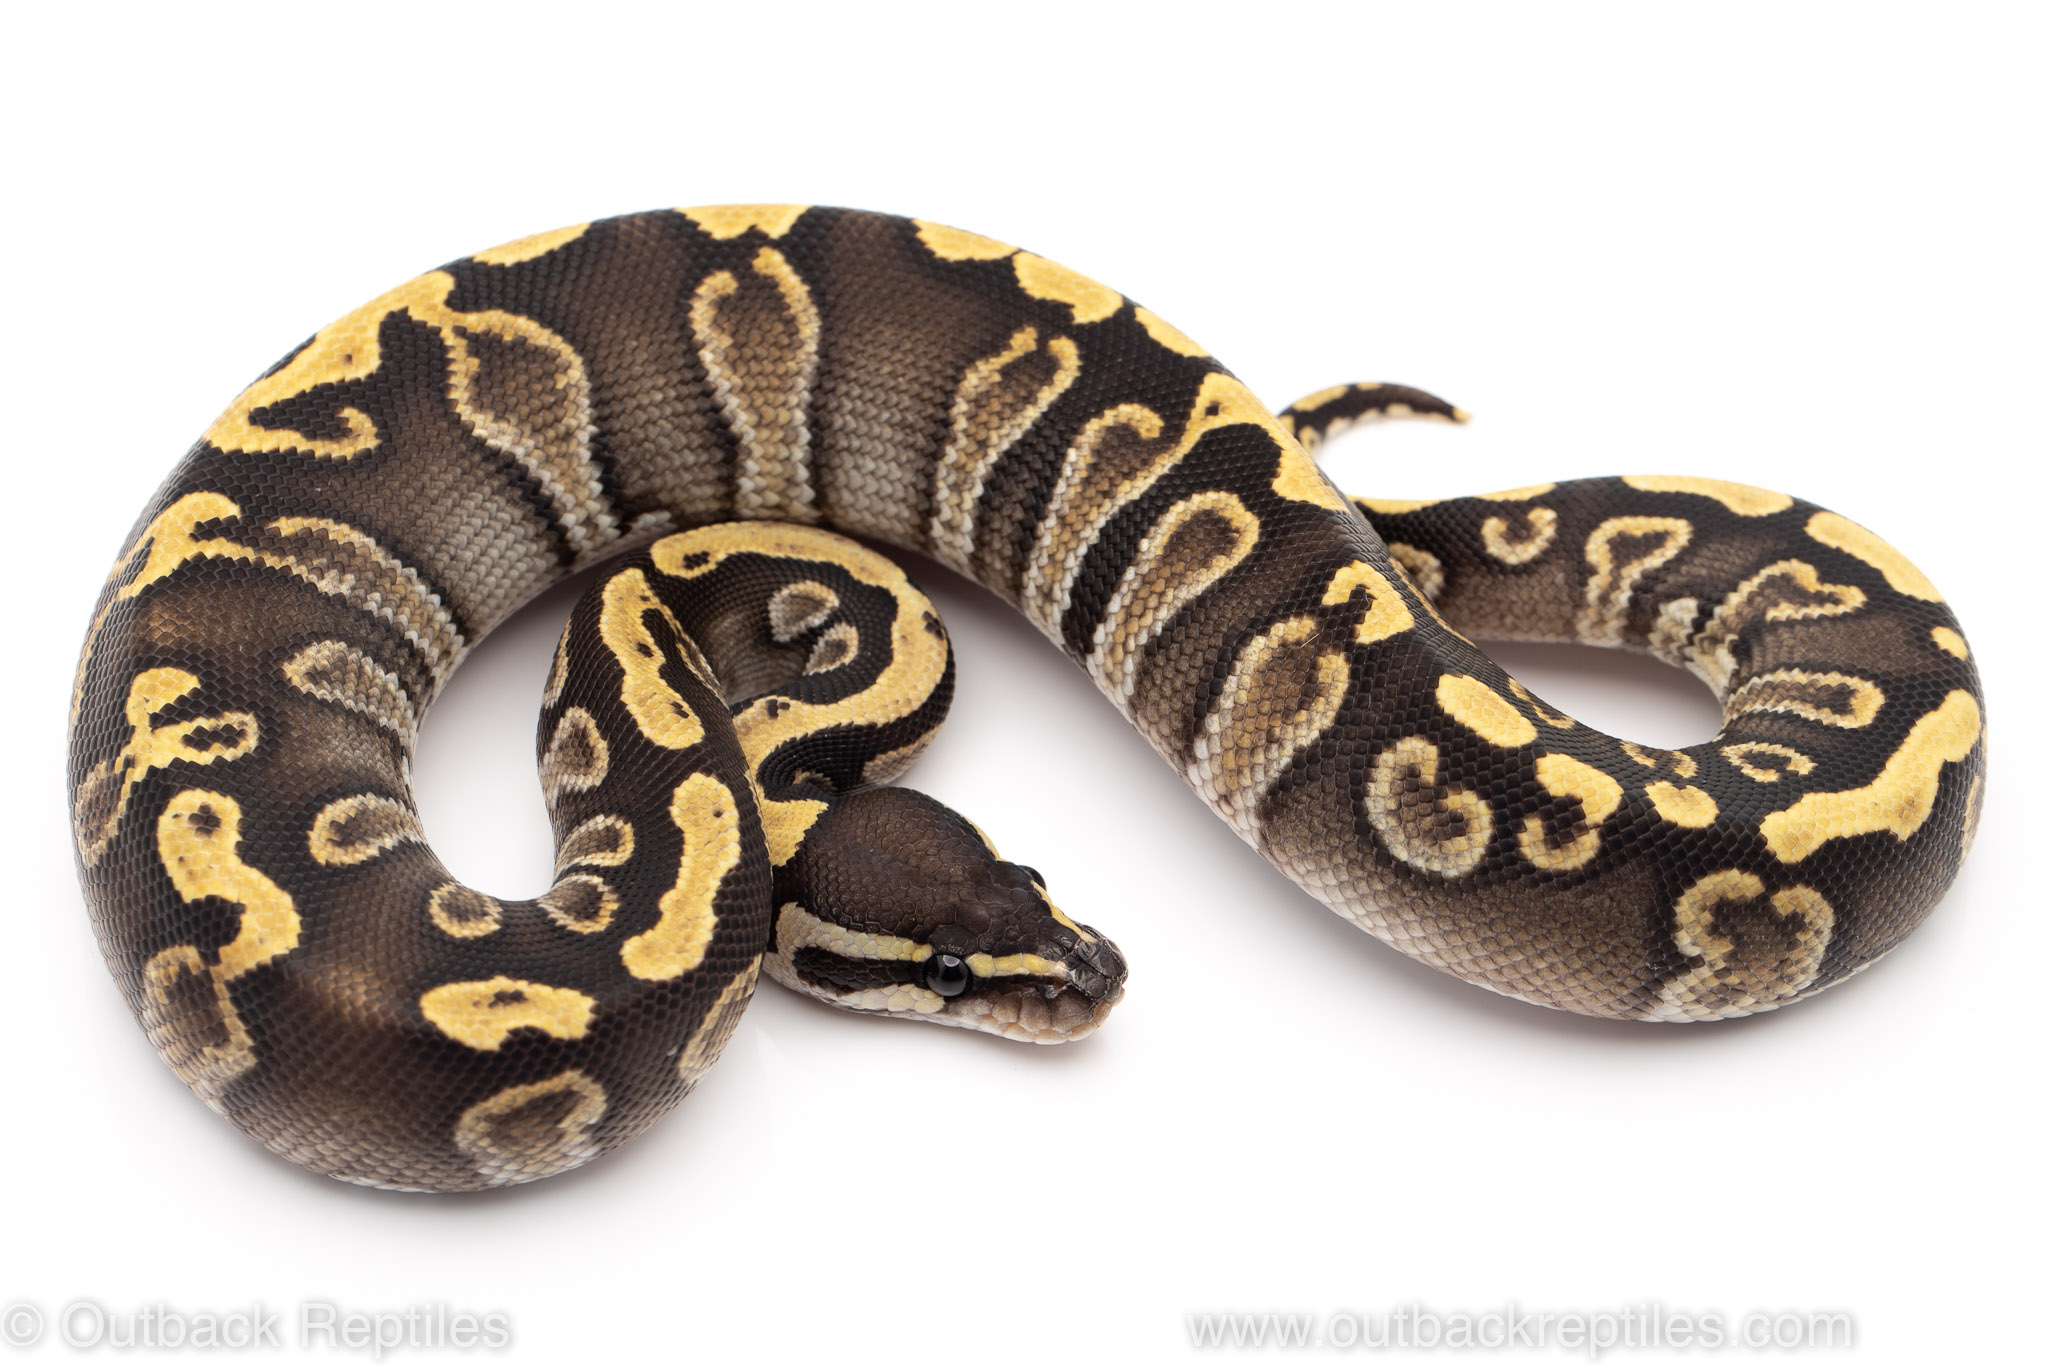 ghi mystic ball python for sale